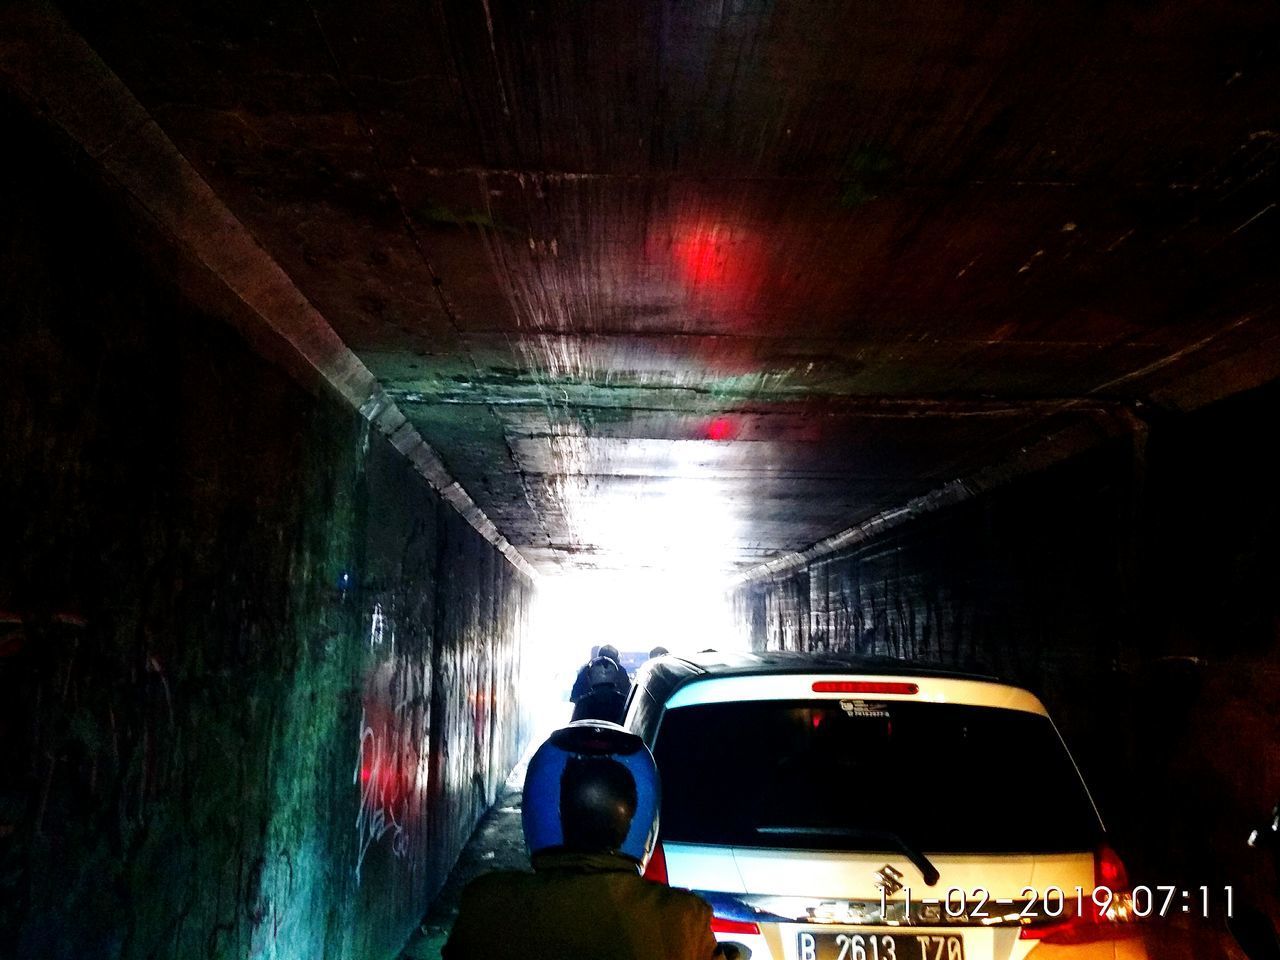 REAR VIEW OF MAN PHOTOGRAPHING ILLUMINATED TUNNEL